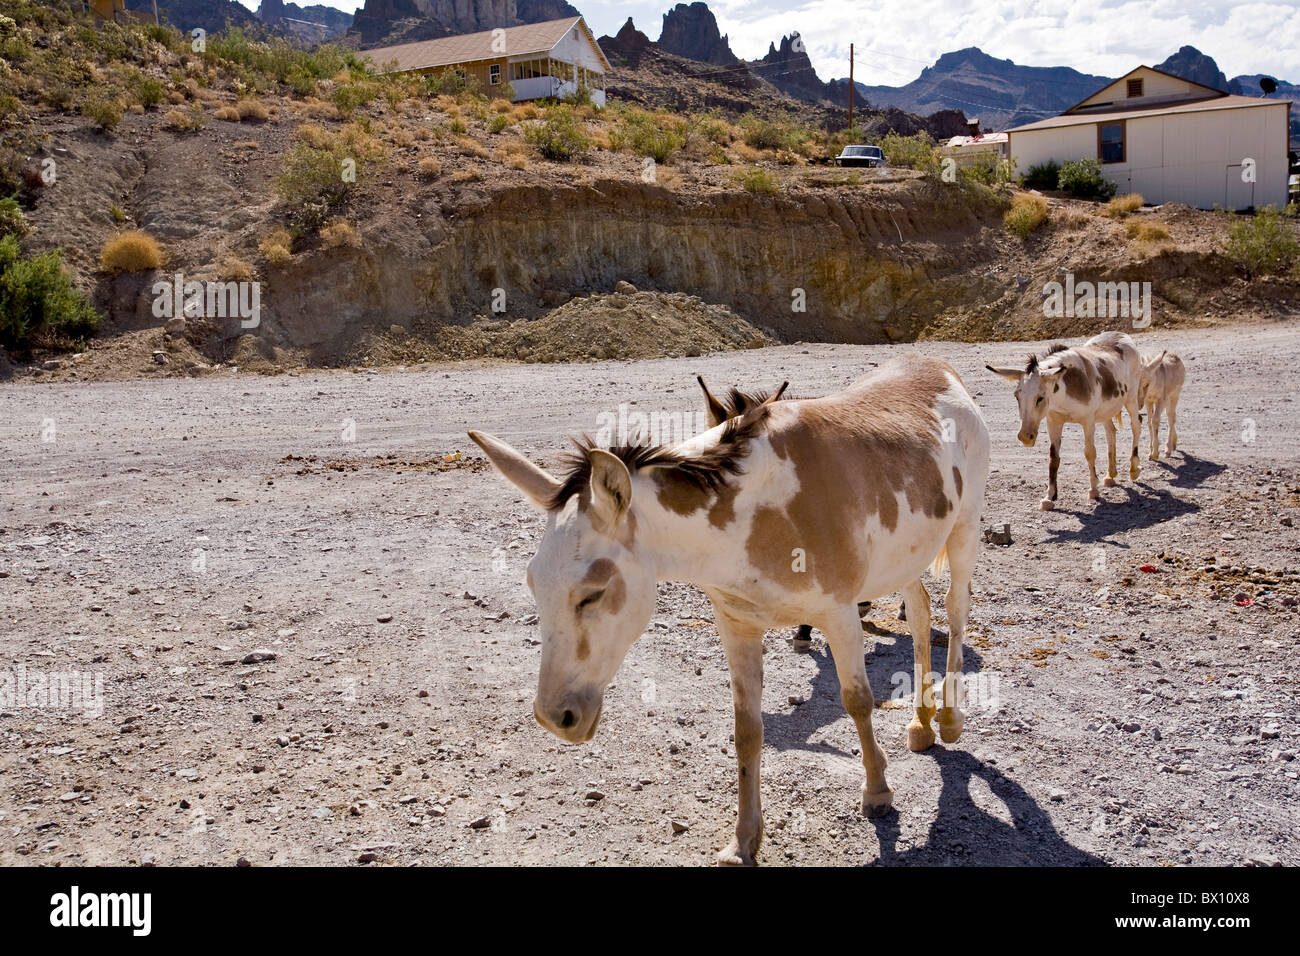 Donkeys start their search for carrots from tourist in the old mining town of Oatman, Arizona, USA Stock Photo